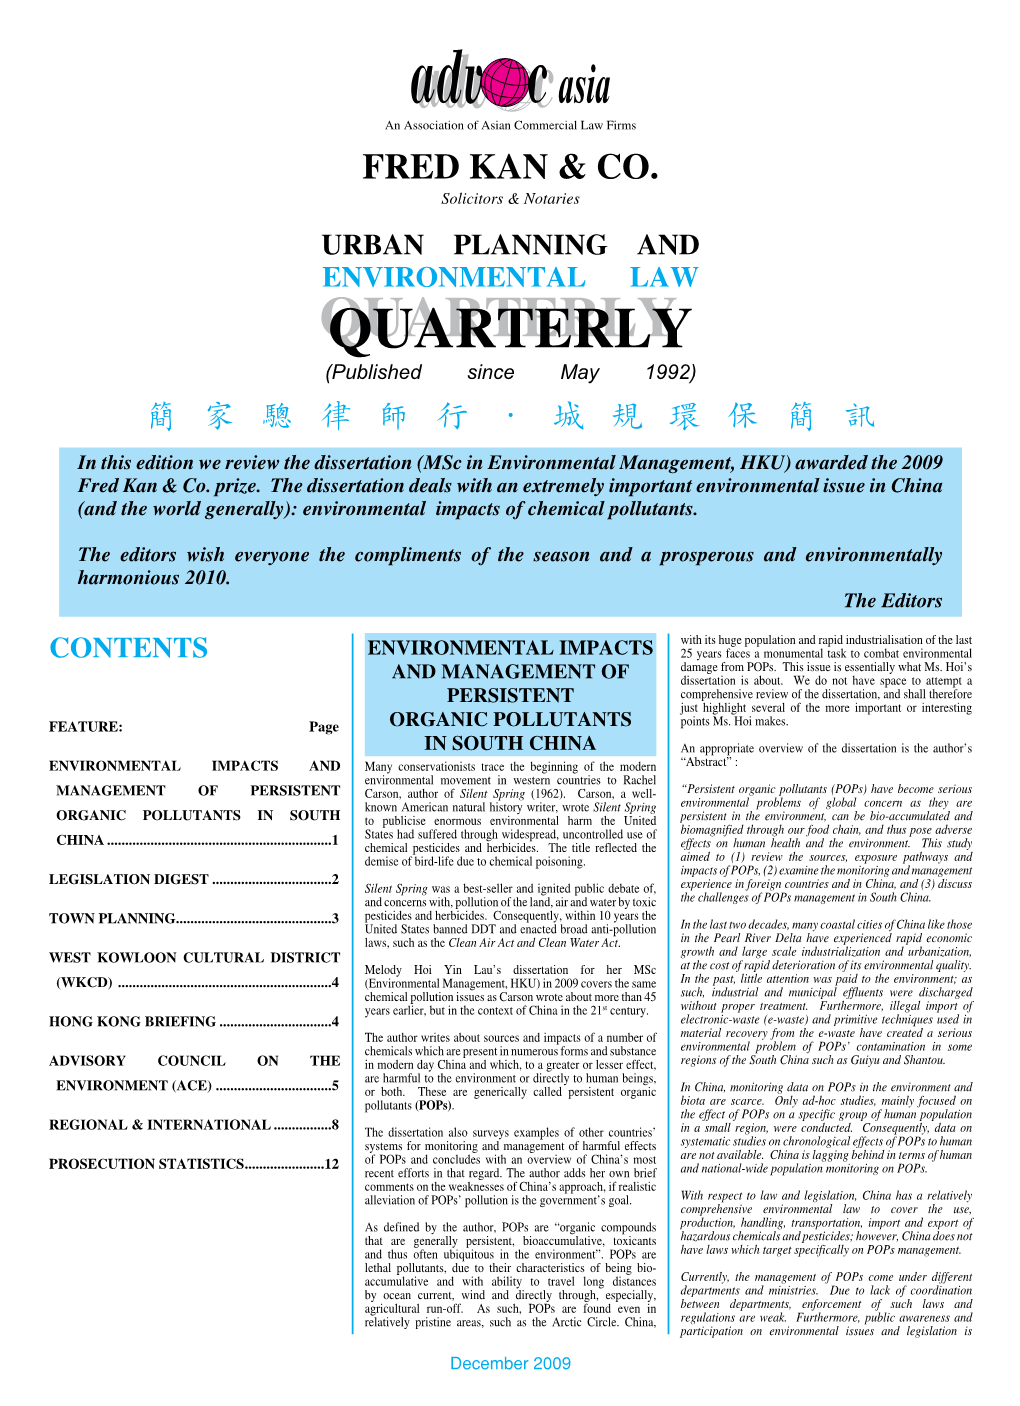 URBAN PLANNING and ENVIRONMENTAL LAW QUARTERLYQUARTERLY (Published Since May 1992)